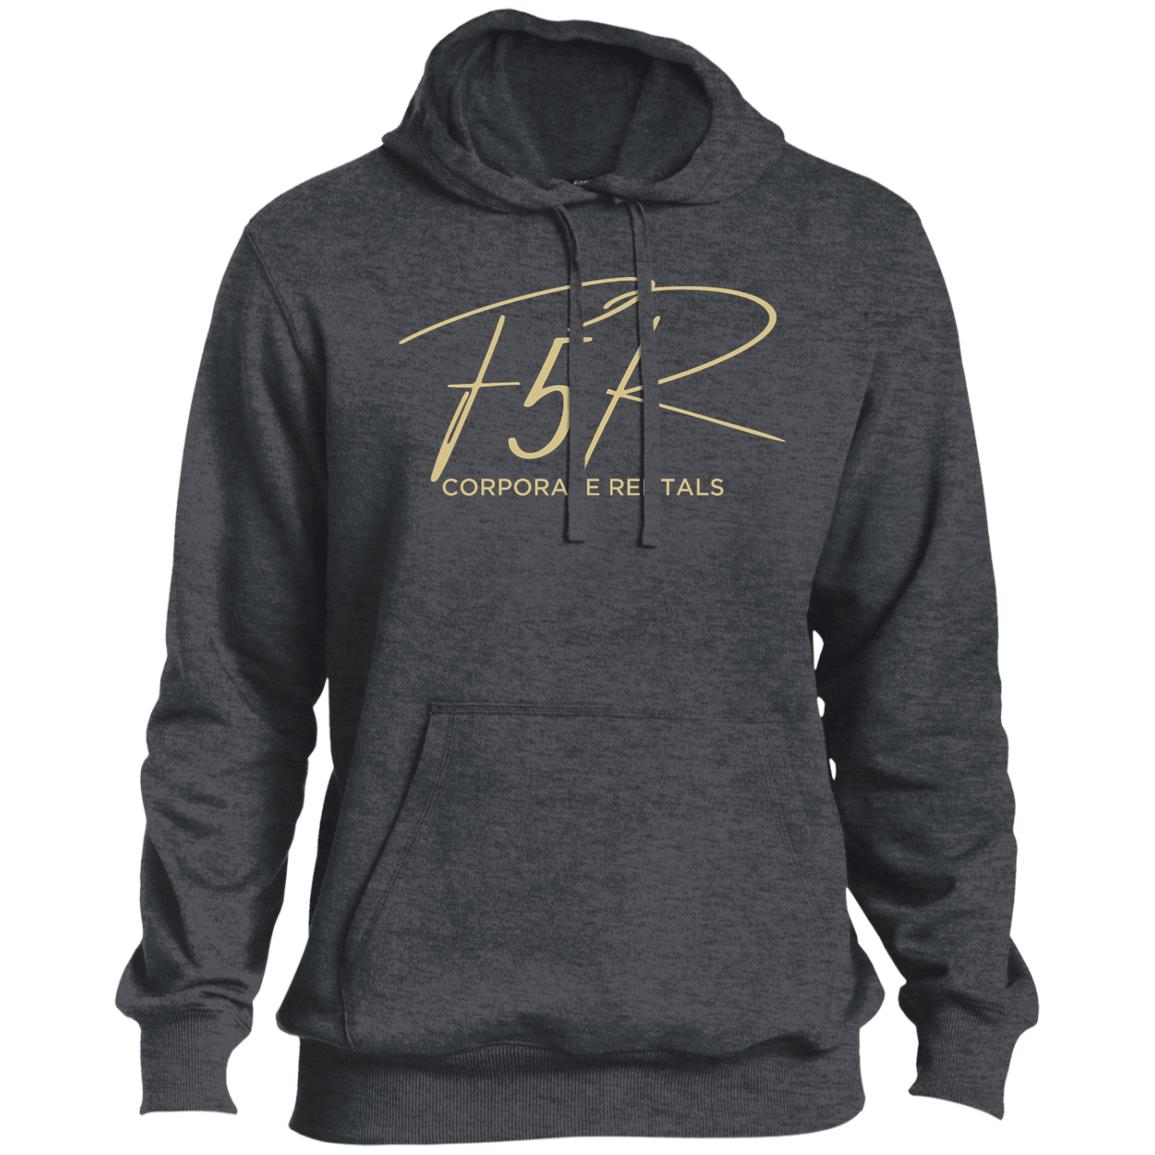 F5R Pullover Hoodie